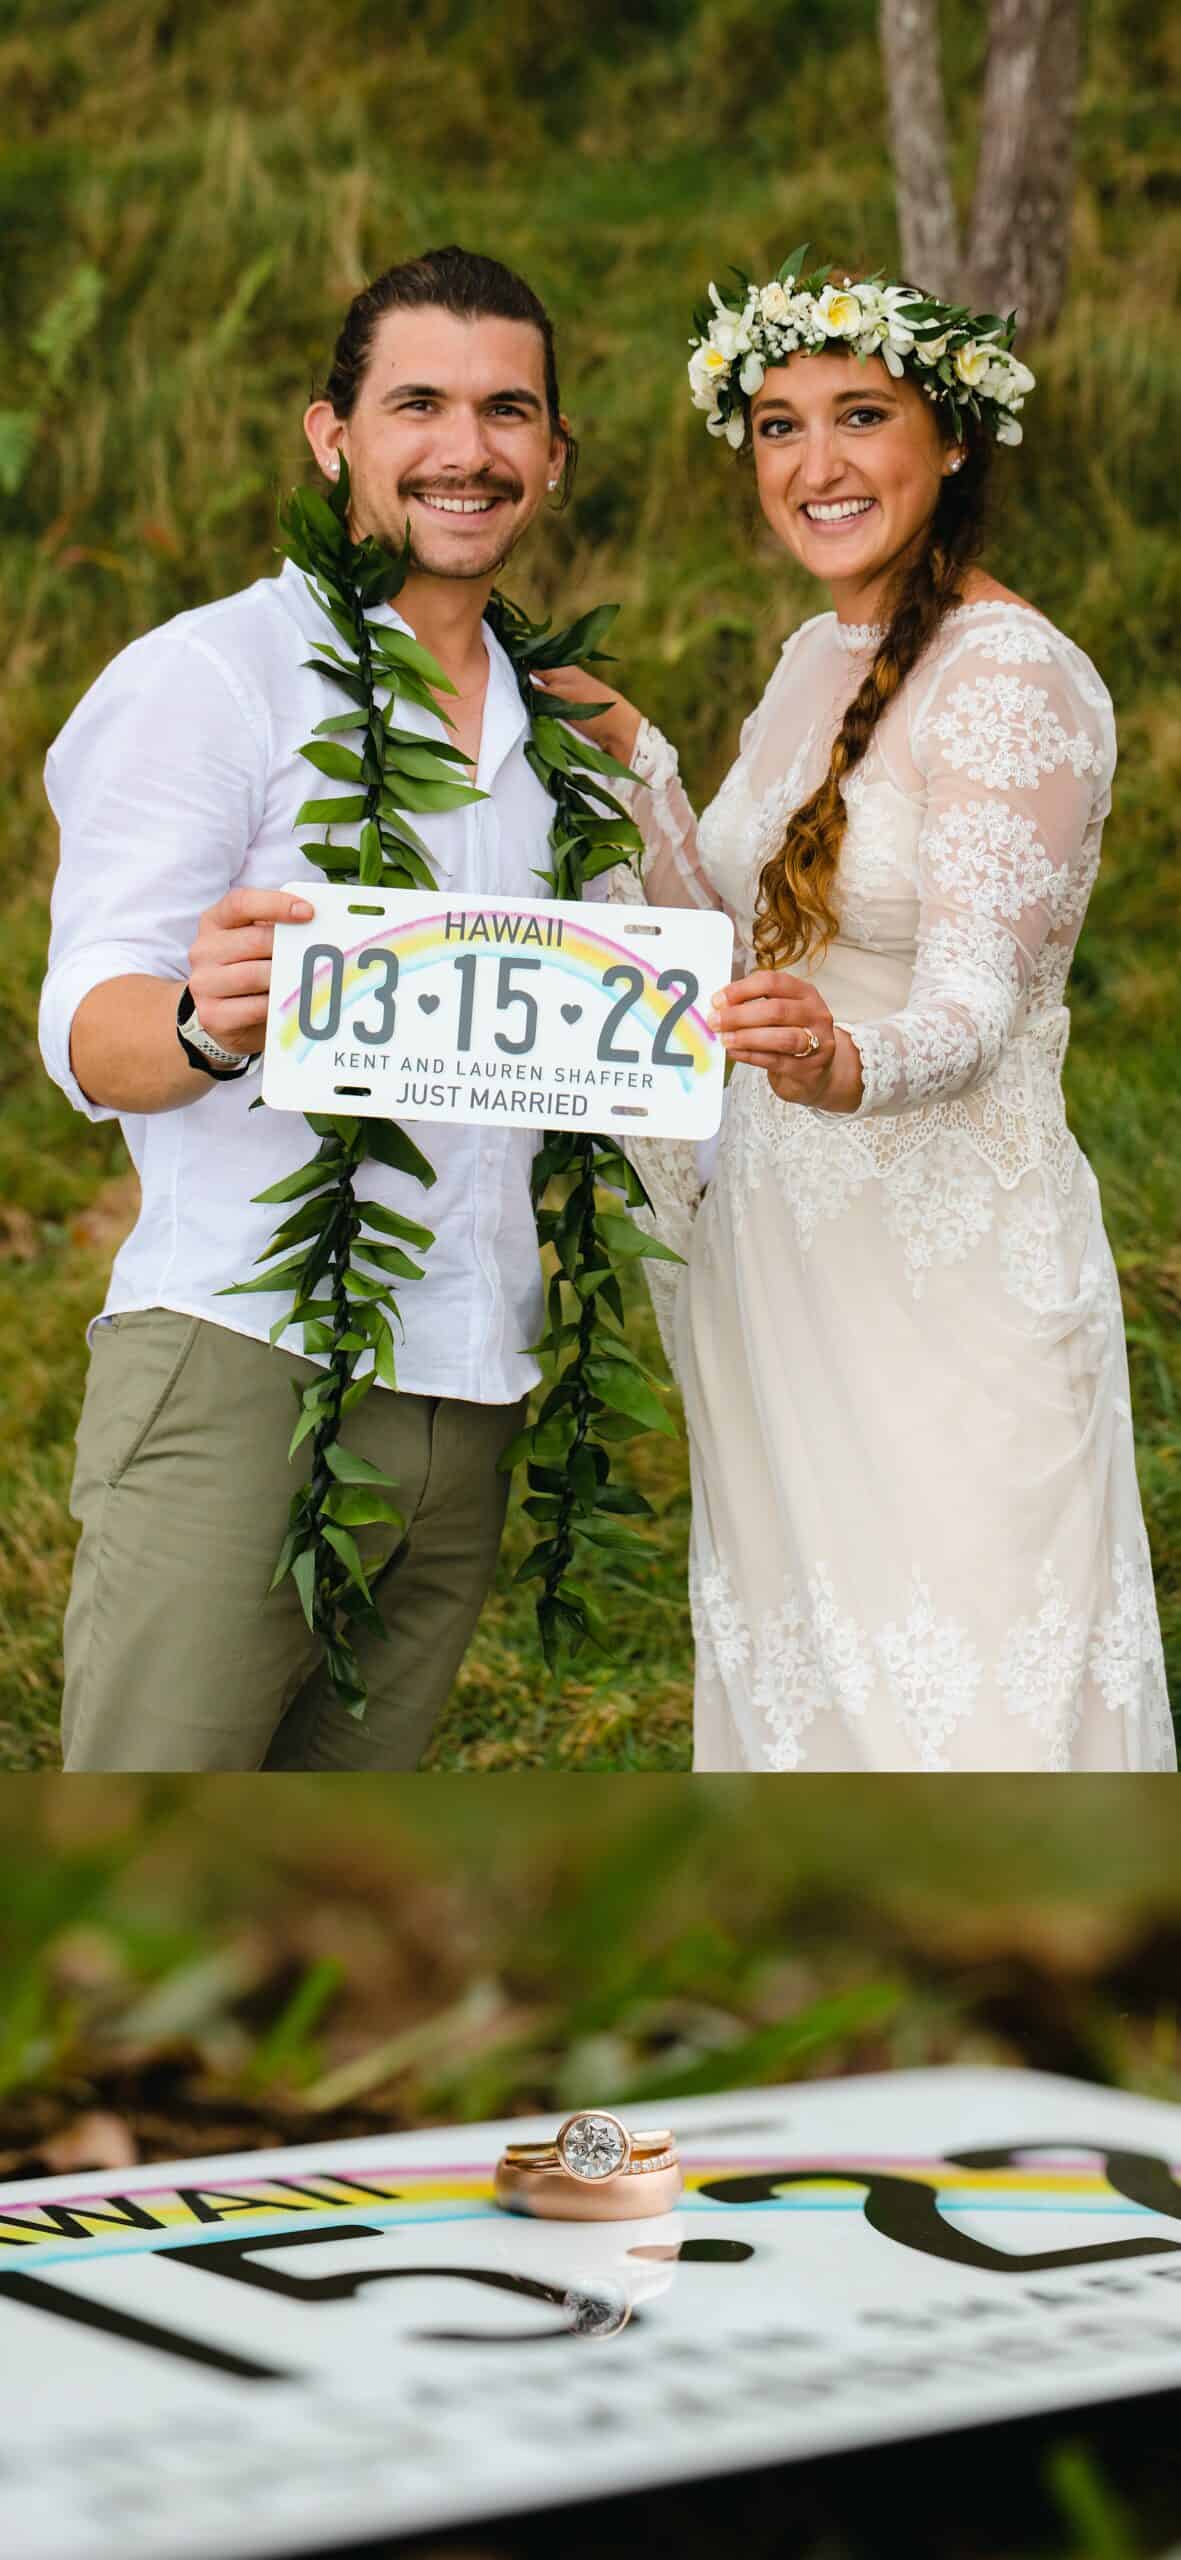 couple holding hawaii license plate 